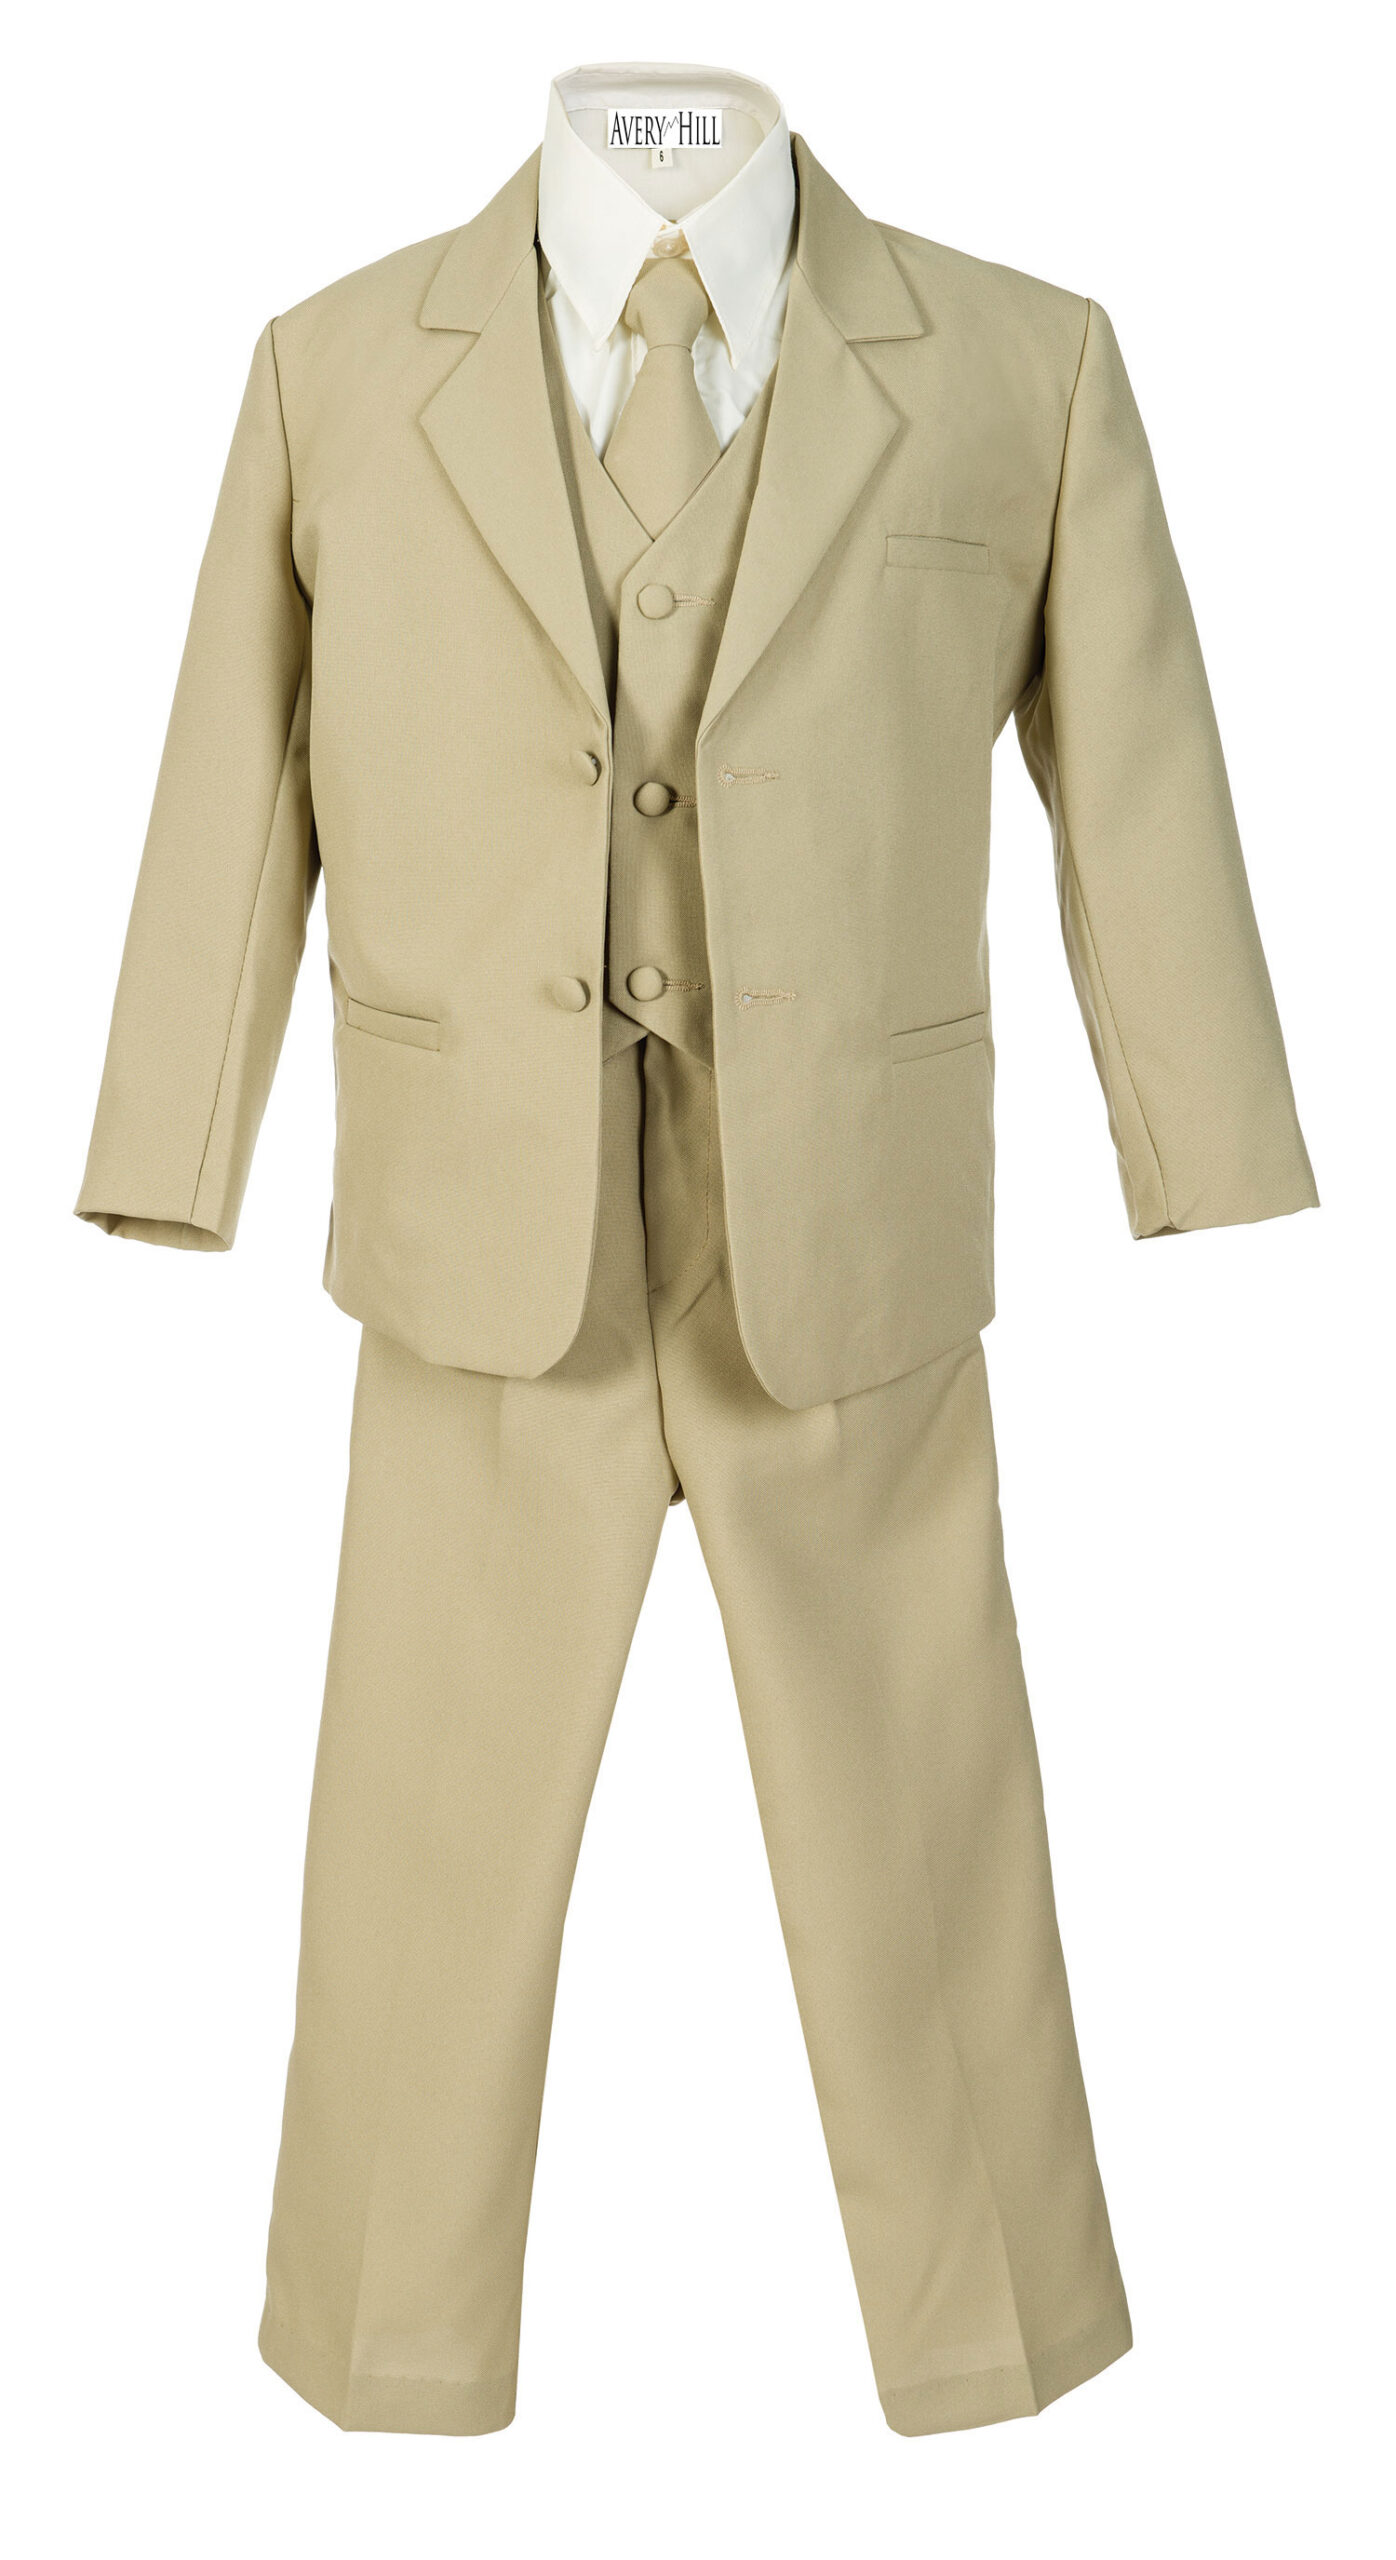 Avery Hill Boys Formal 5 Piece Suit with Shirt and Vest Khaki - 4T